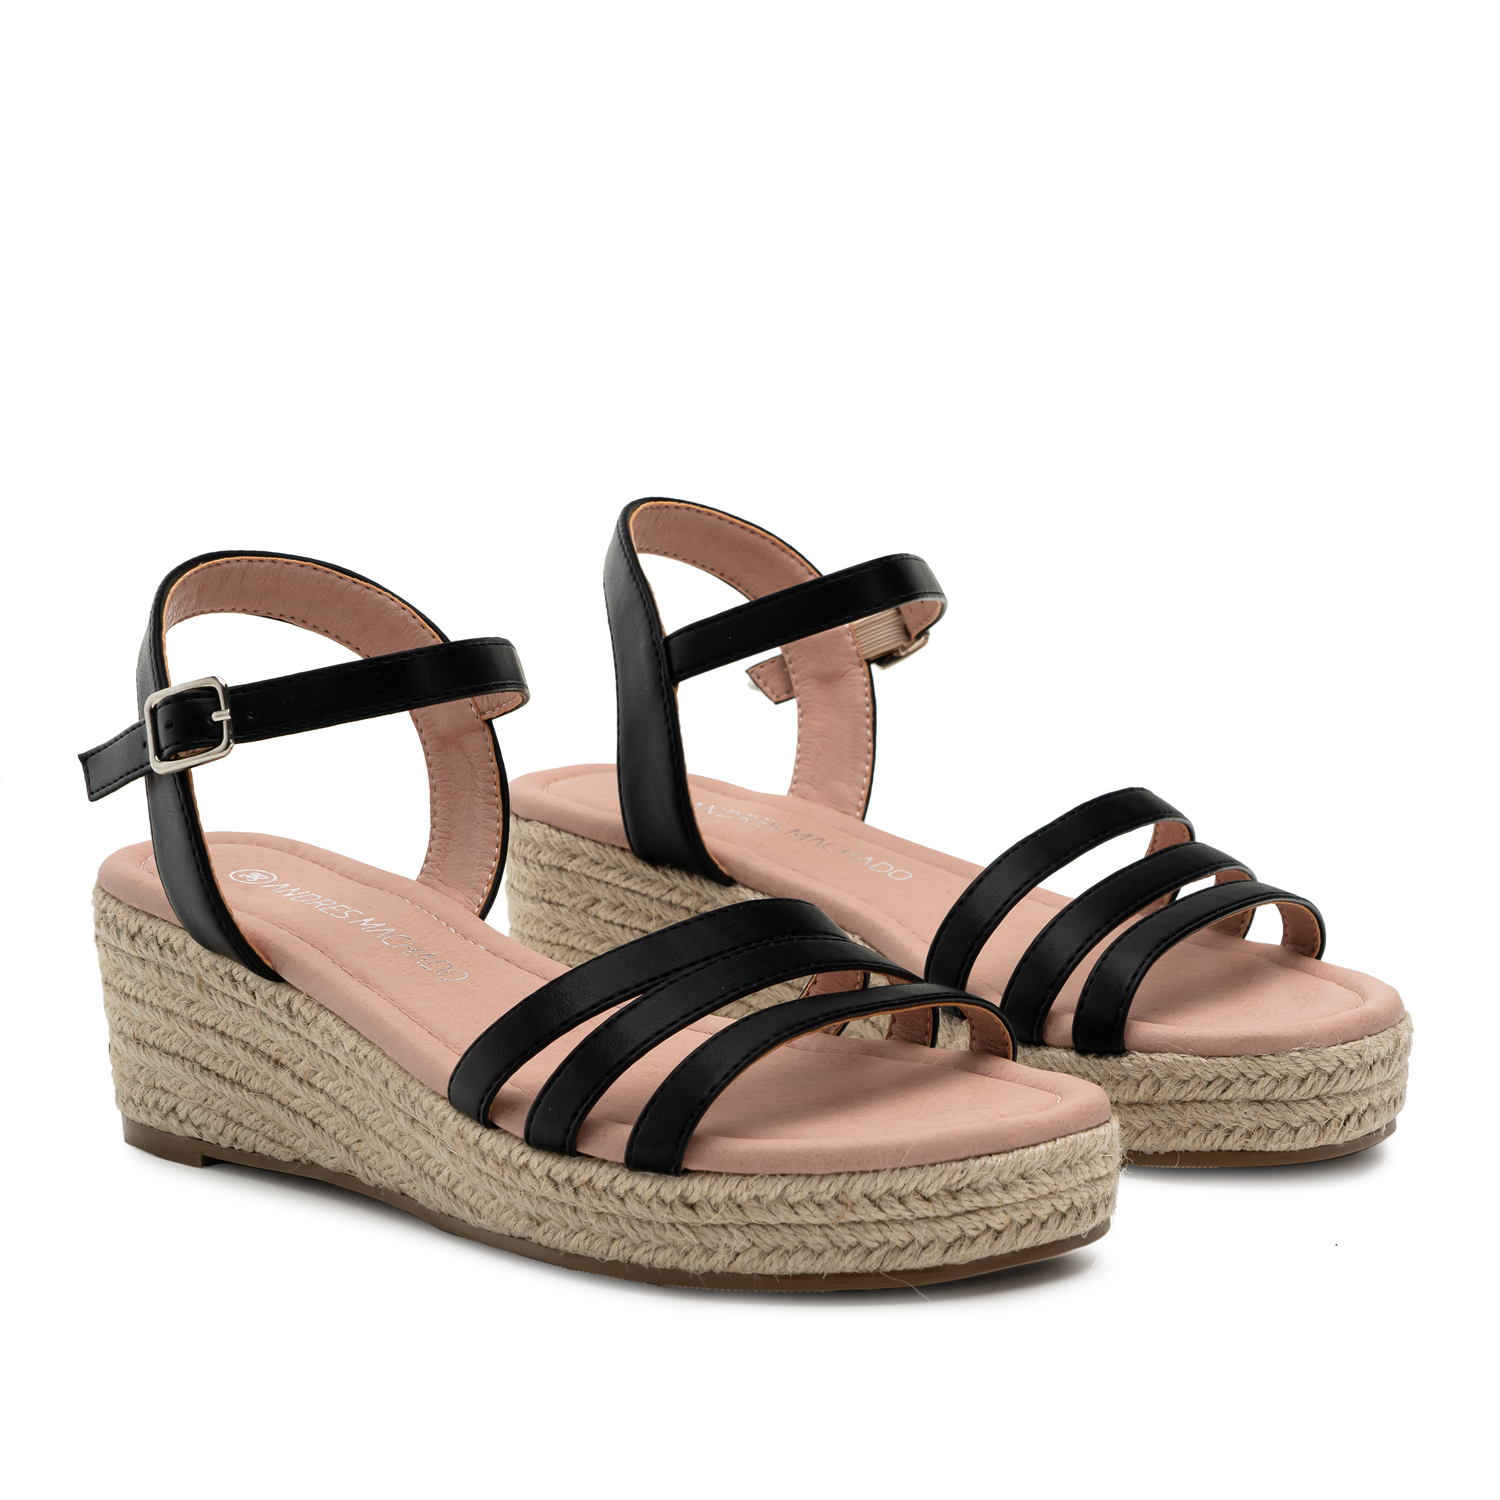 Black Faux Leather Sandals with Jute Wedge 